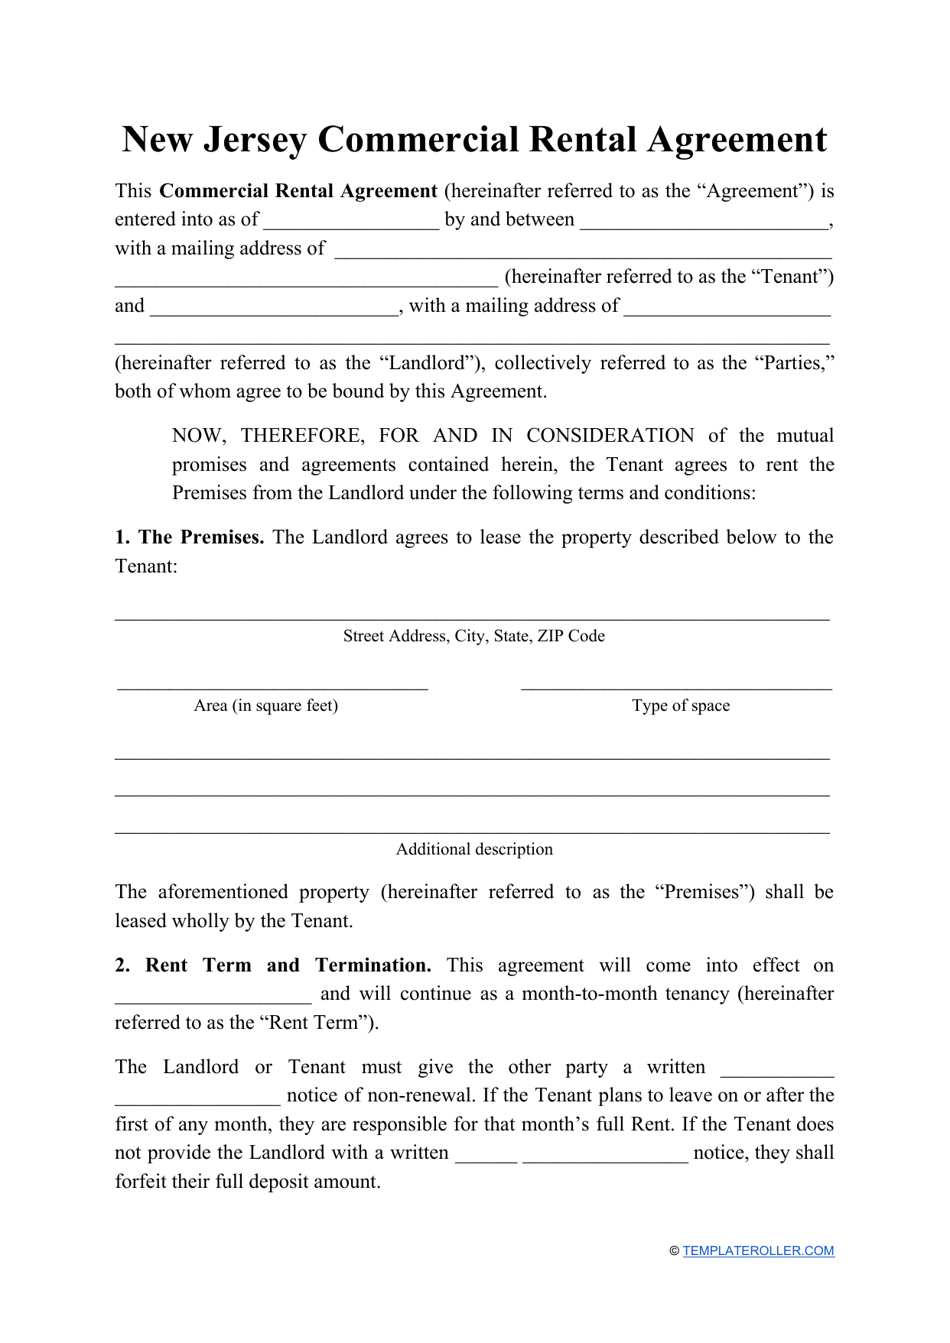 Commercial Rental Agreement Template - New Jersey, Page 1